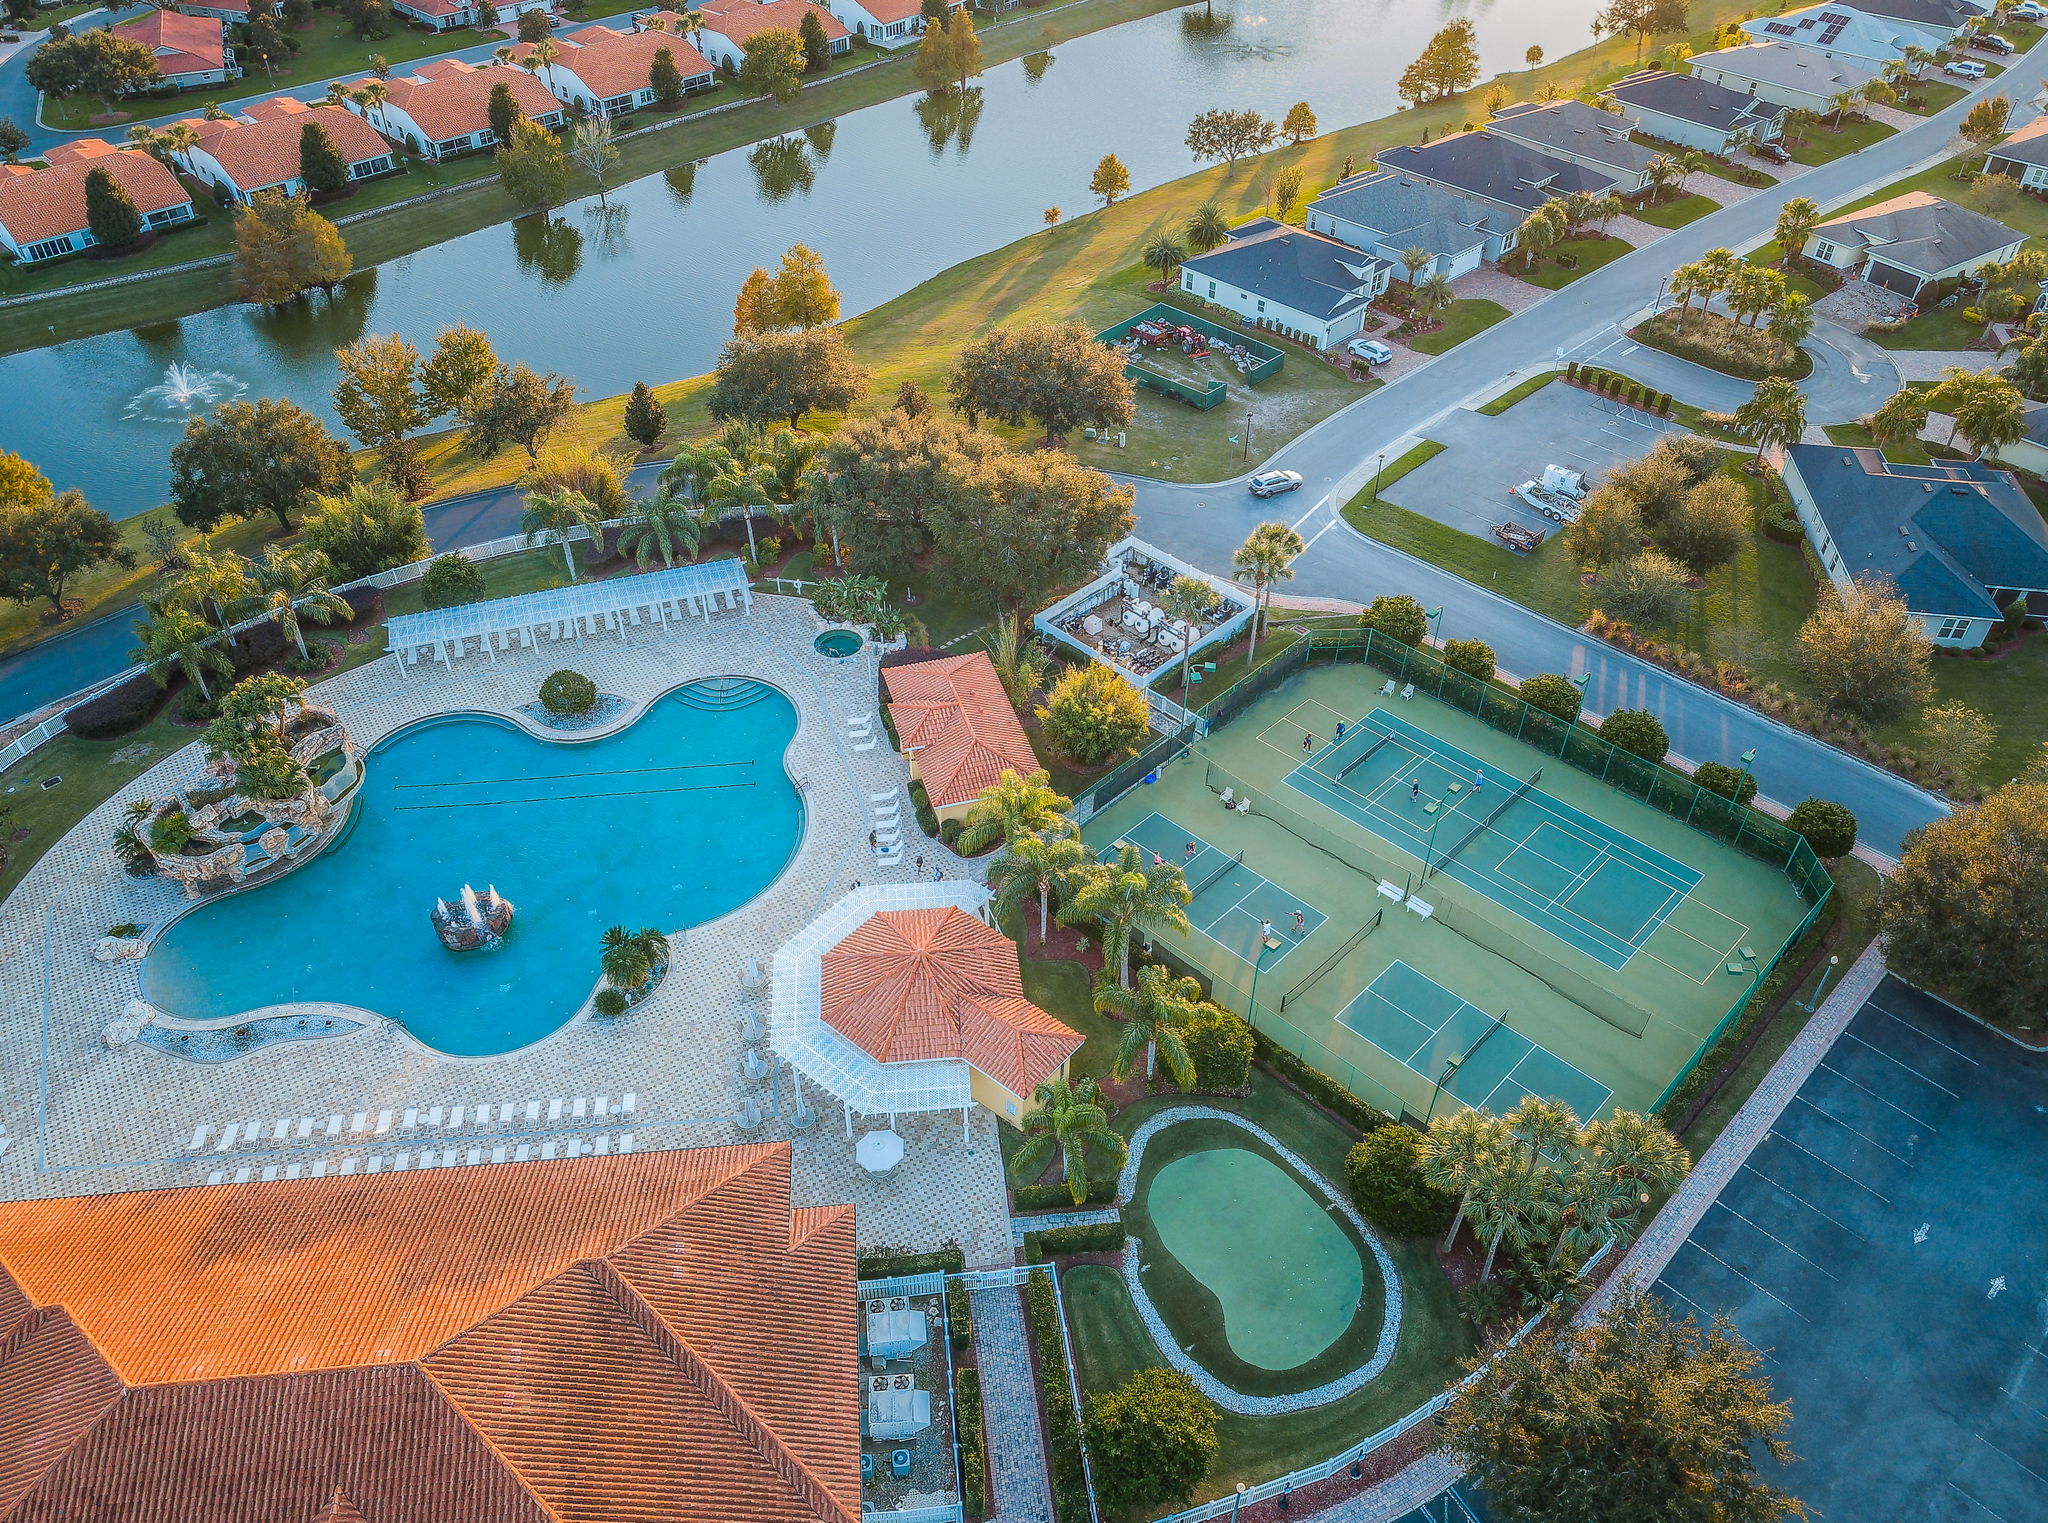 2-Pool, Tennis and Pickleball Courts